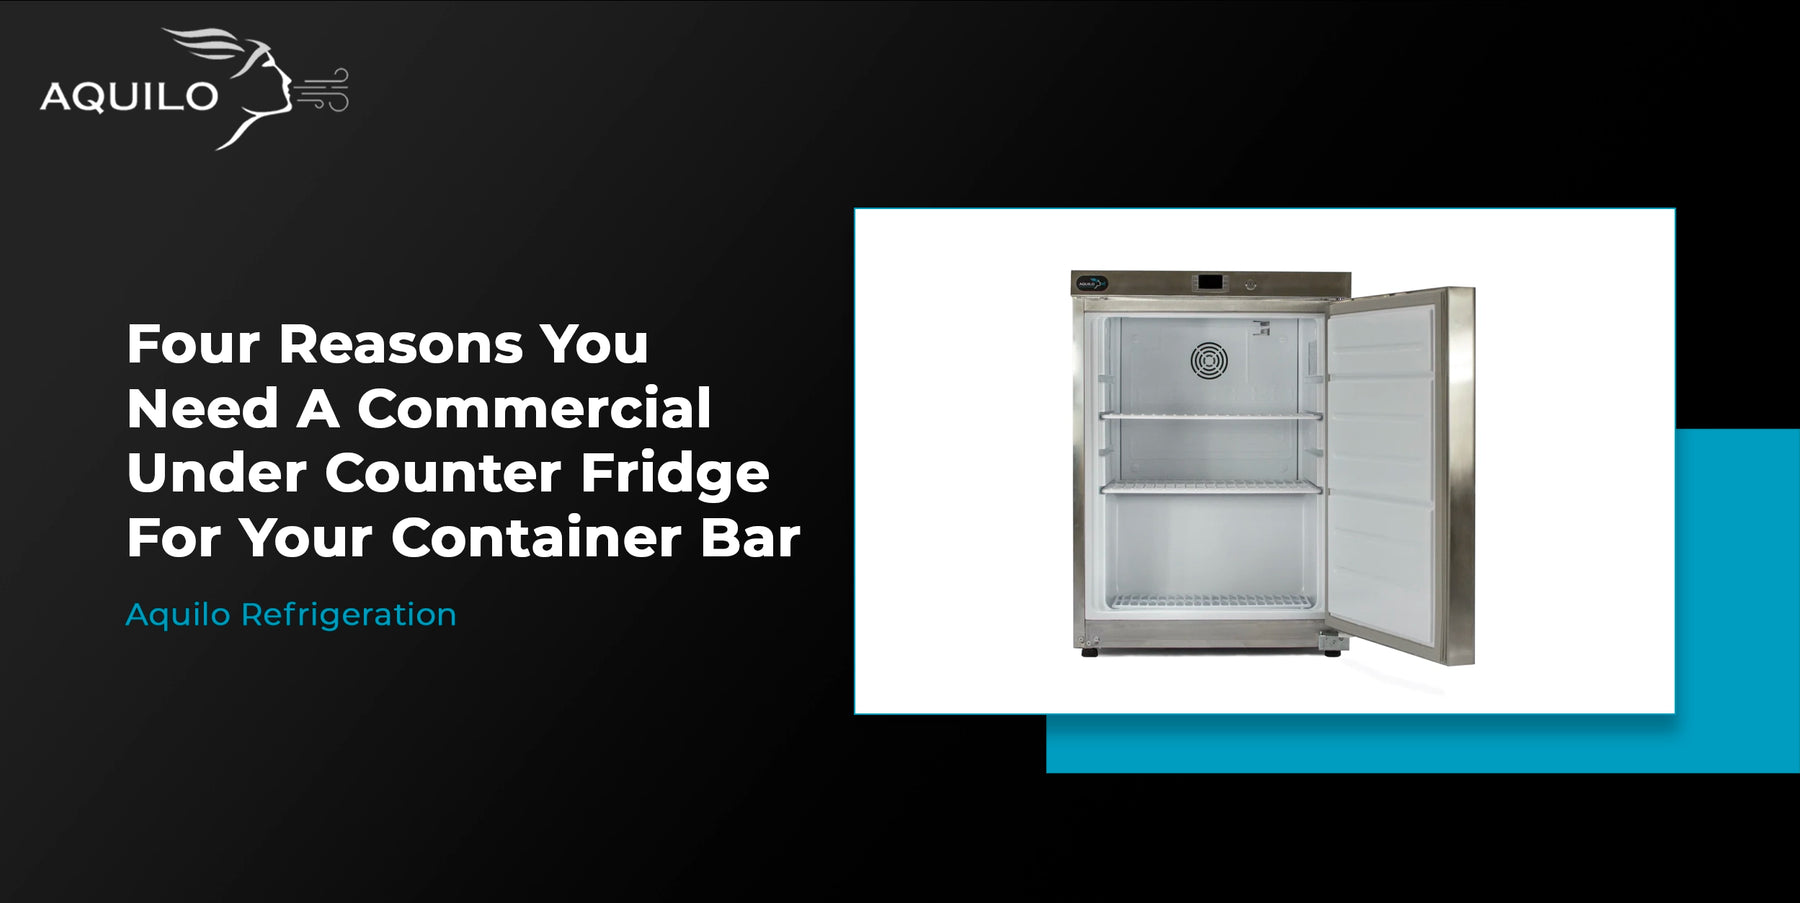 Four reasons you need a commercial undercounter fridge for your container bar